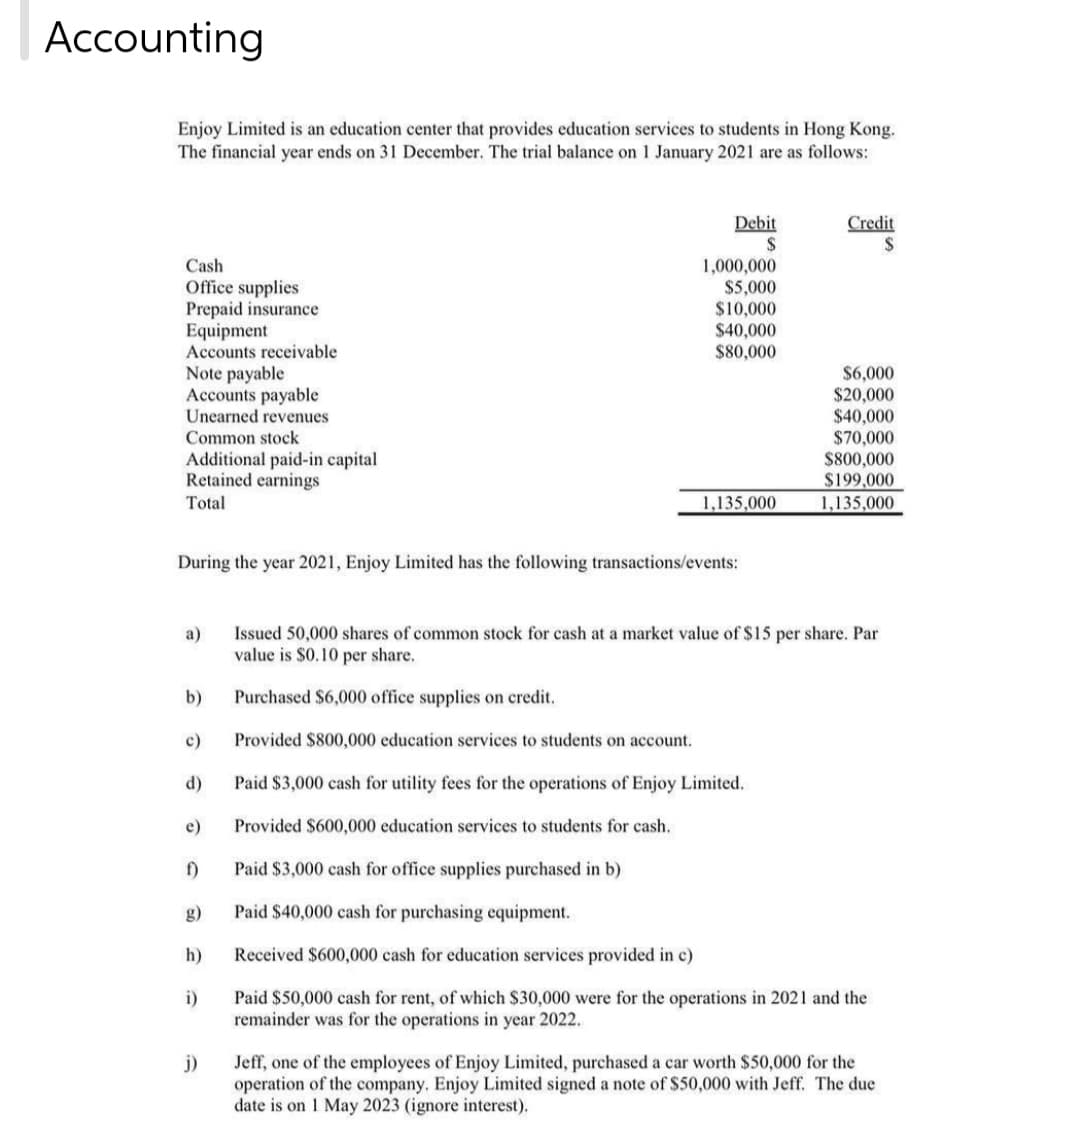 Accounting
Enjoy Limited is an education center that provides education services to students in Hong Kong.
The financial year ends on 31 December. The trial balance on 1 January 2021 are as follows:
Cash
Office supplies
Prepaid insurance
Equipment
Accounts receivable
Note payable
Accounts payable
Unearned revenues
Common stock
Additional paid-in capital
Retained earnings
Total
a)
b)
c)
d)
e)
f)
g)
h)
i)
Debit
$
During the year 2021, Enjoy Limited has the following transactions/events:
j)
1,000,000
$5,000
$10,000
$40,000
$80,000
1,135,000
Credit
$
$6,000
$20,000
$40,000
$70,000
$800,000
$199,000
1,135,000
Issued 50,000 shares of common stock for cash at a market value of $15 per share. Par
value is $0.10 per share.
Purchased $6,000 office supplies on credit.
Provided $800,000 education services to students on account.
Paid $3,000 cash for utility fees for the operations of Enjoy Limited.
Provided $600,000 education services to students for cash.
Paid $3,000 cash for office supplies purchased in b)
Paid $40,000 cash for purchasing equipment.
Received $600,000 cash for education services provided in c)
Paid $50,000 cash for rent, of which $30,000 were for the operations in 2021 and the
remainder was for the operations in year 2022.
Jeff, one of the employees of Enjoy Limited, purchased a car worth $50,000 for the
operation of the company. Enjoy Limited signed a note of $50,000 with Jeff. The due
date is on 1 May 2023 (ignore interest).